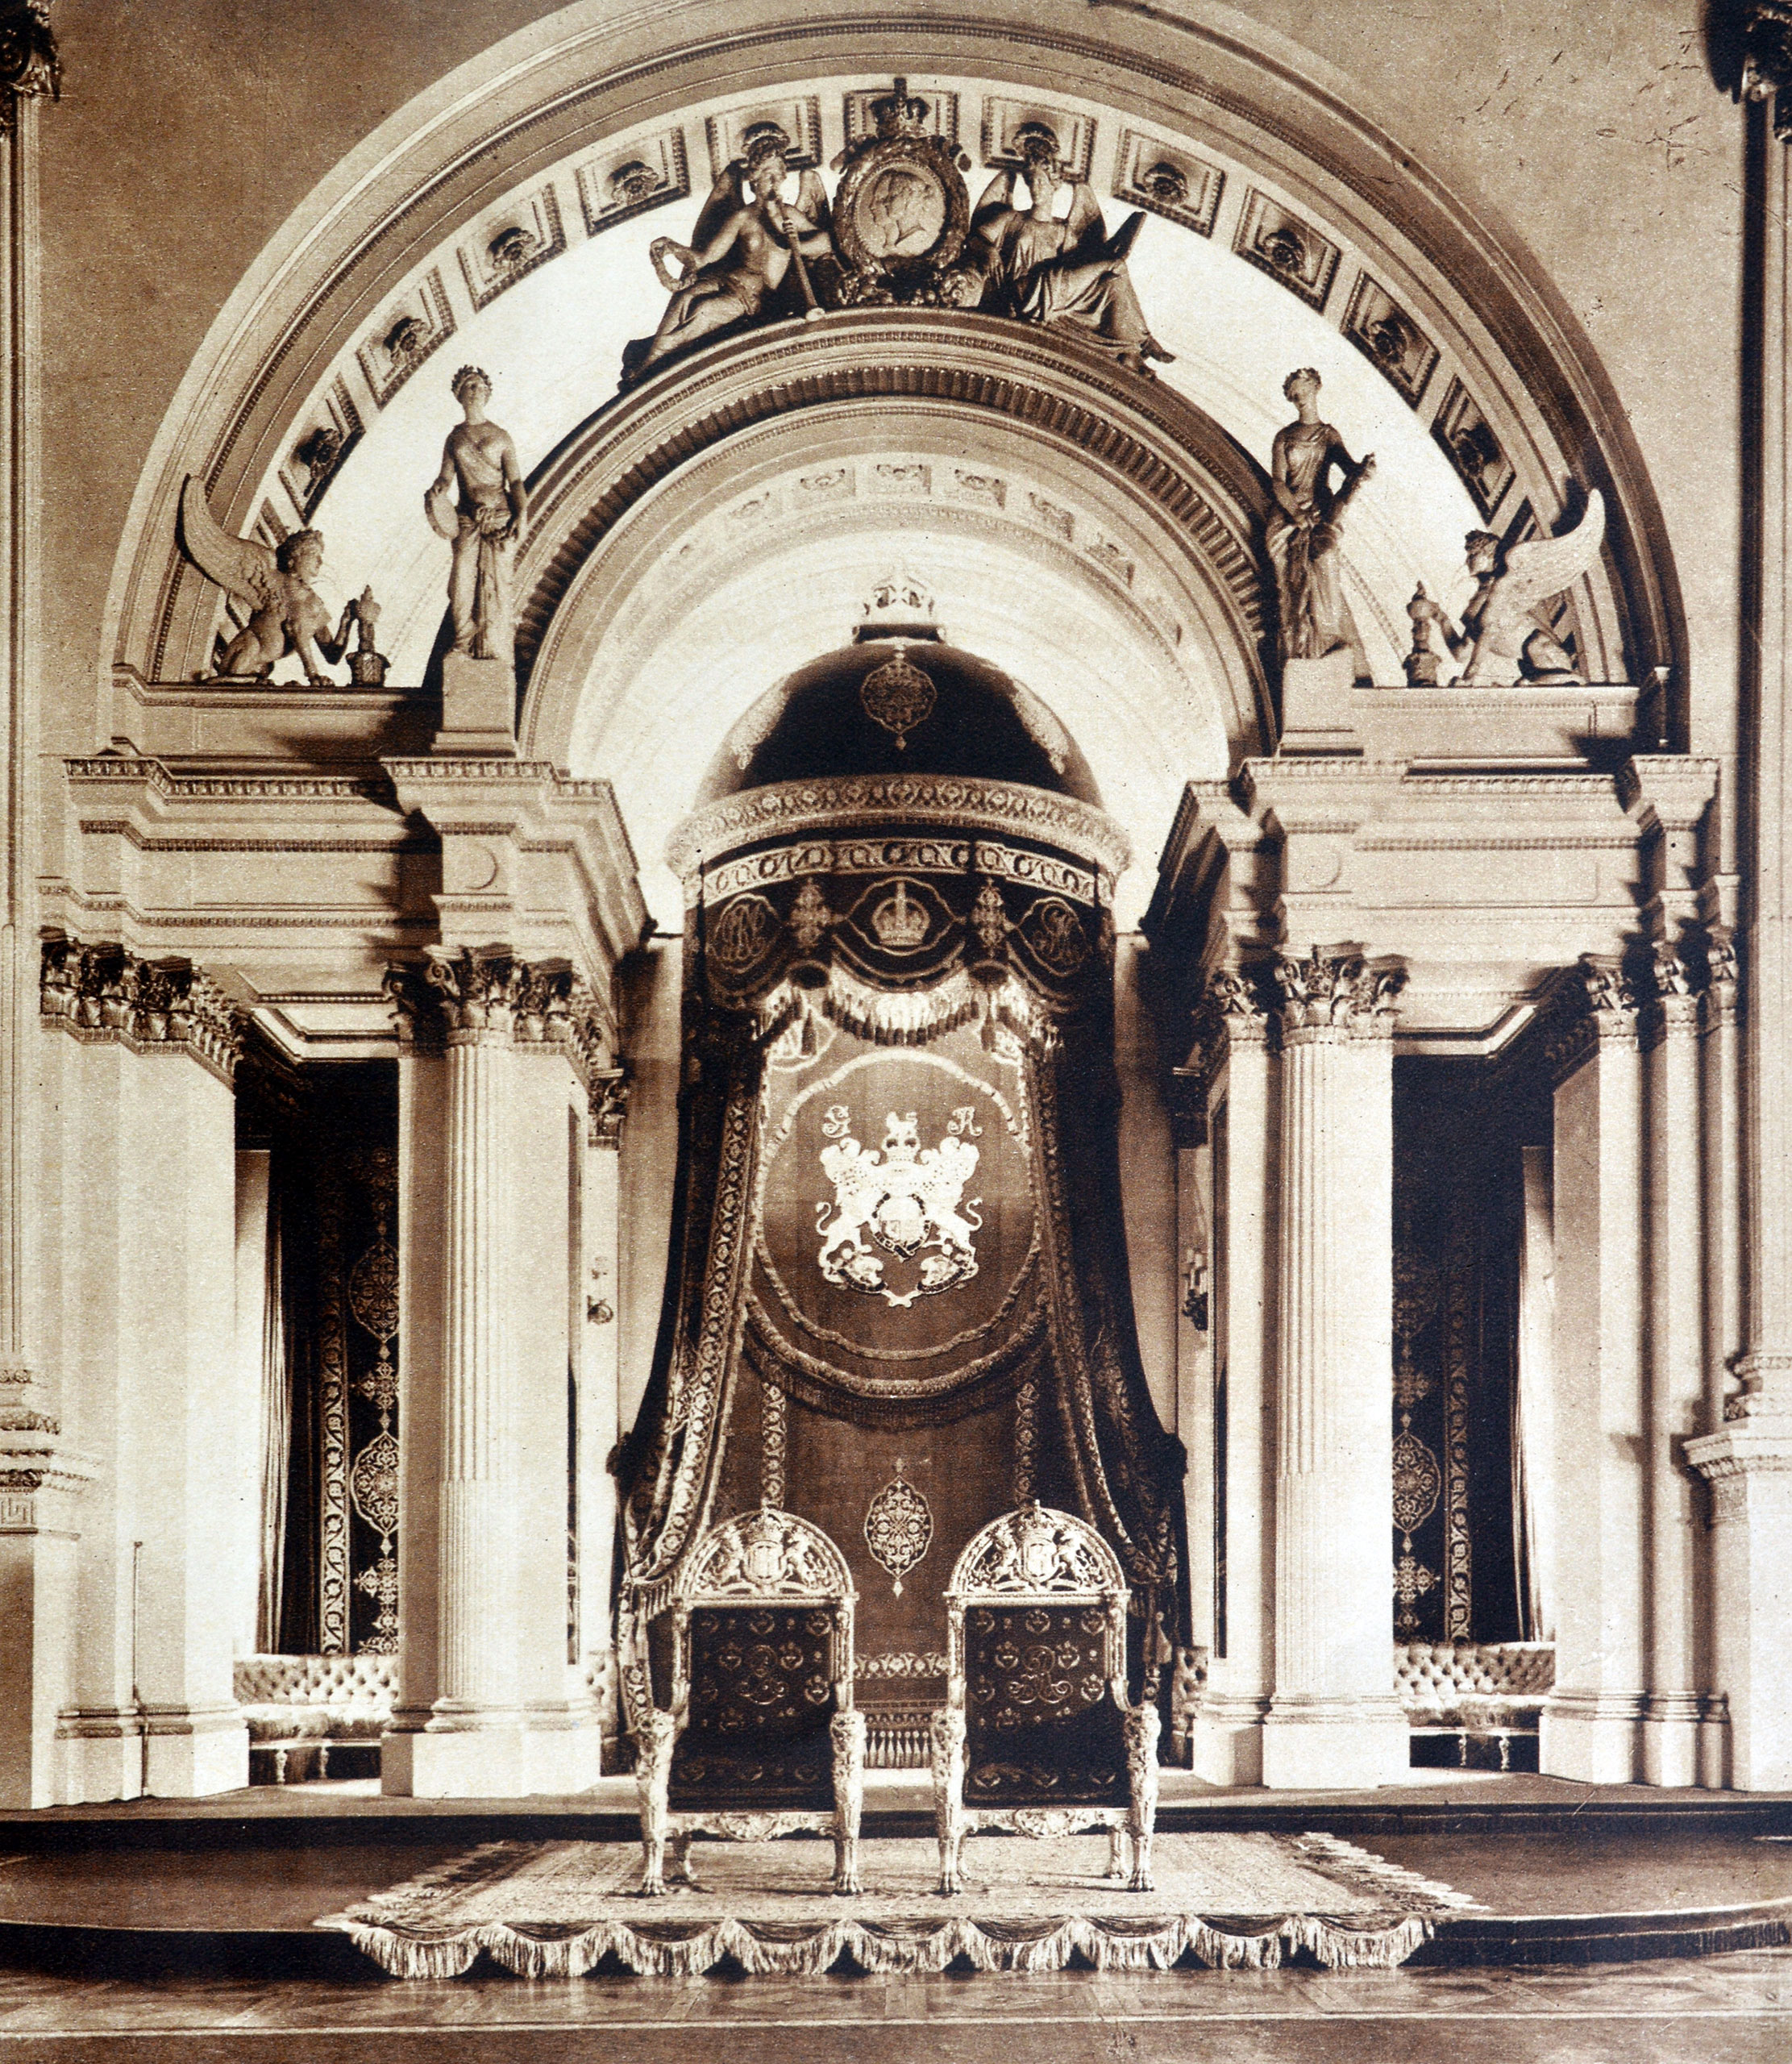 Throne room at Buckingham palace in London, 1935.